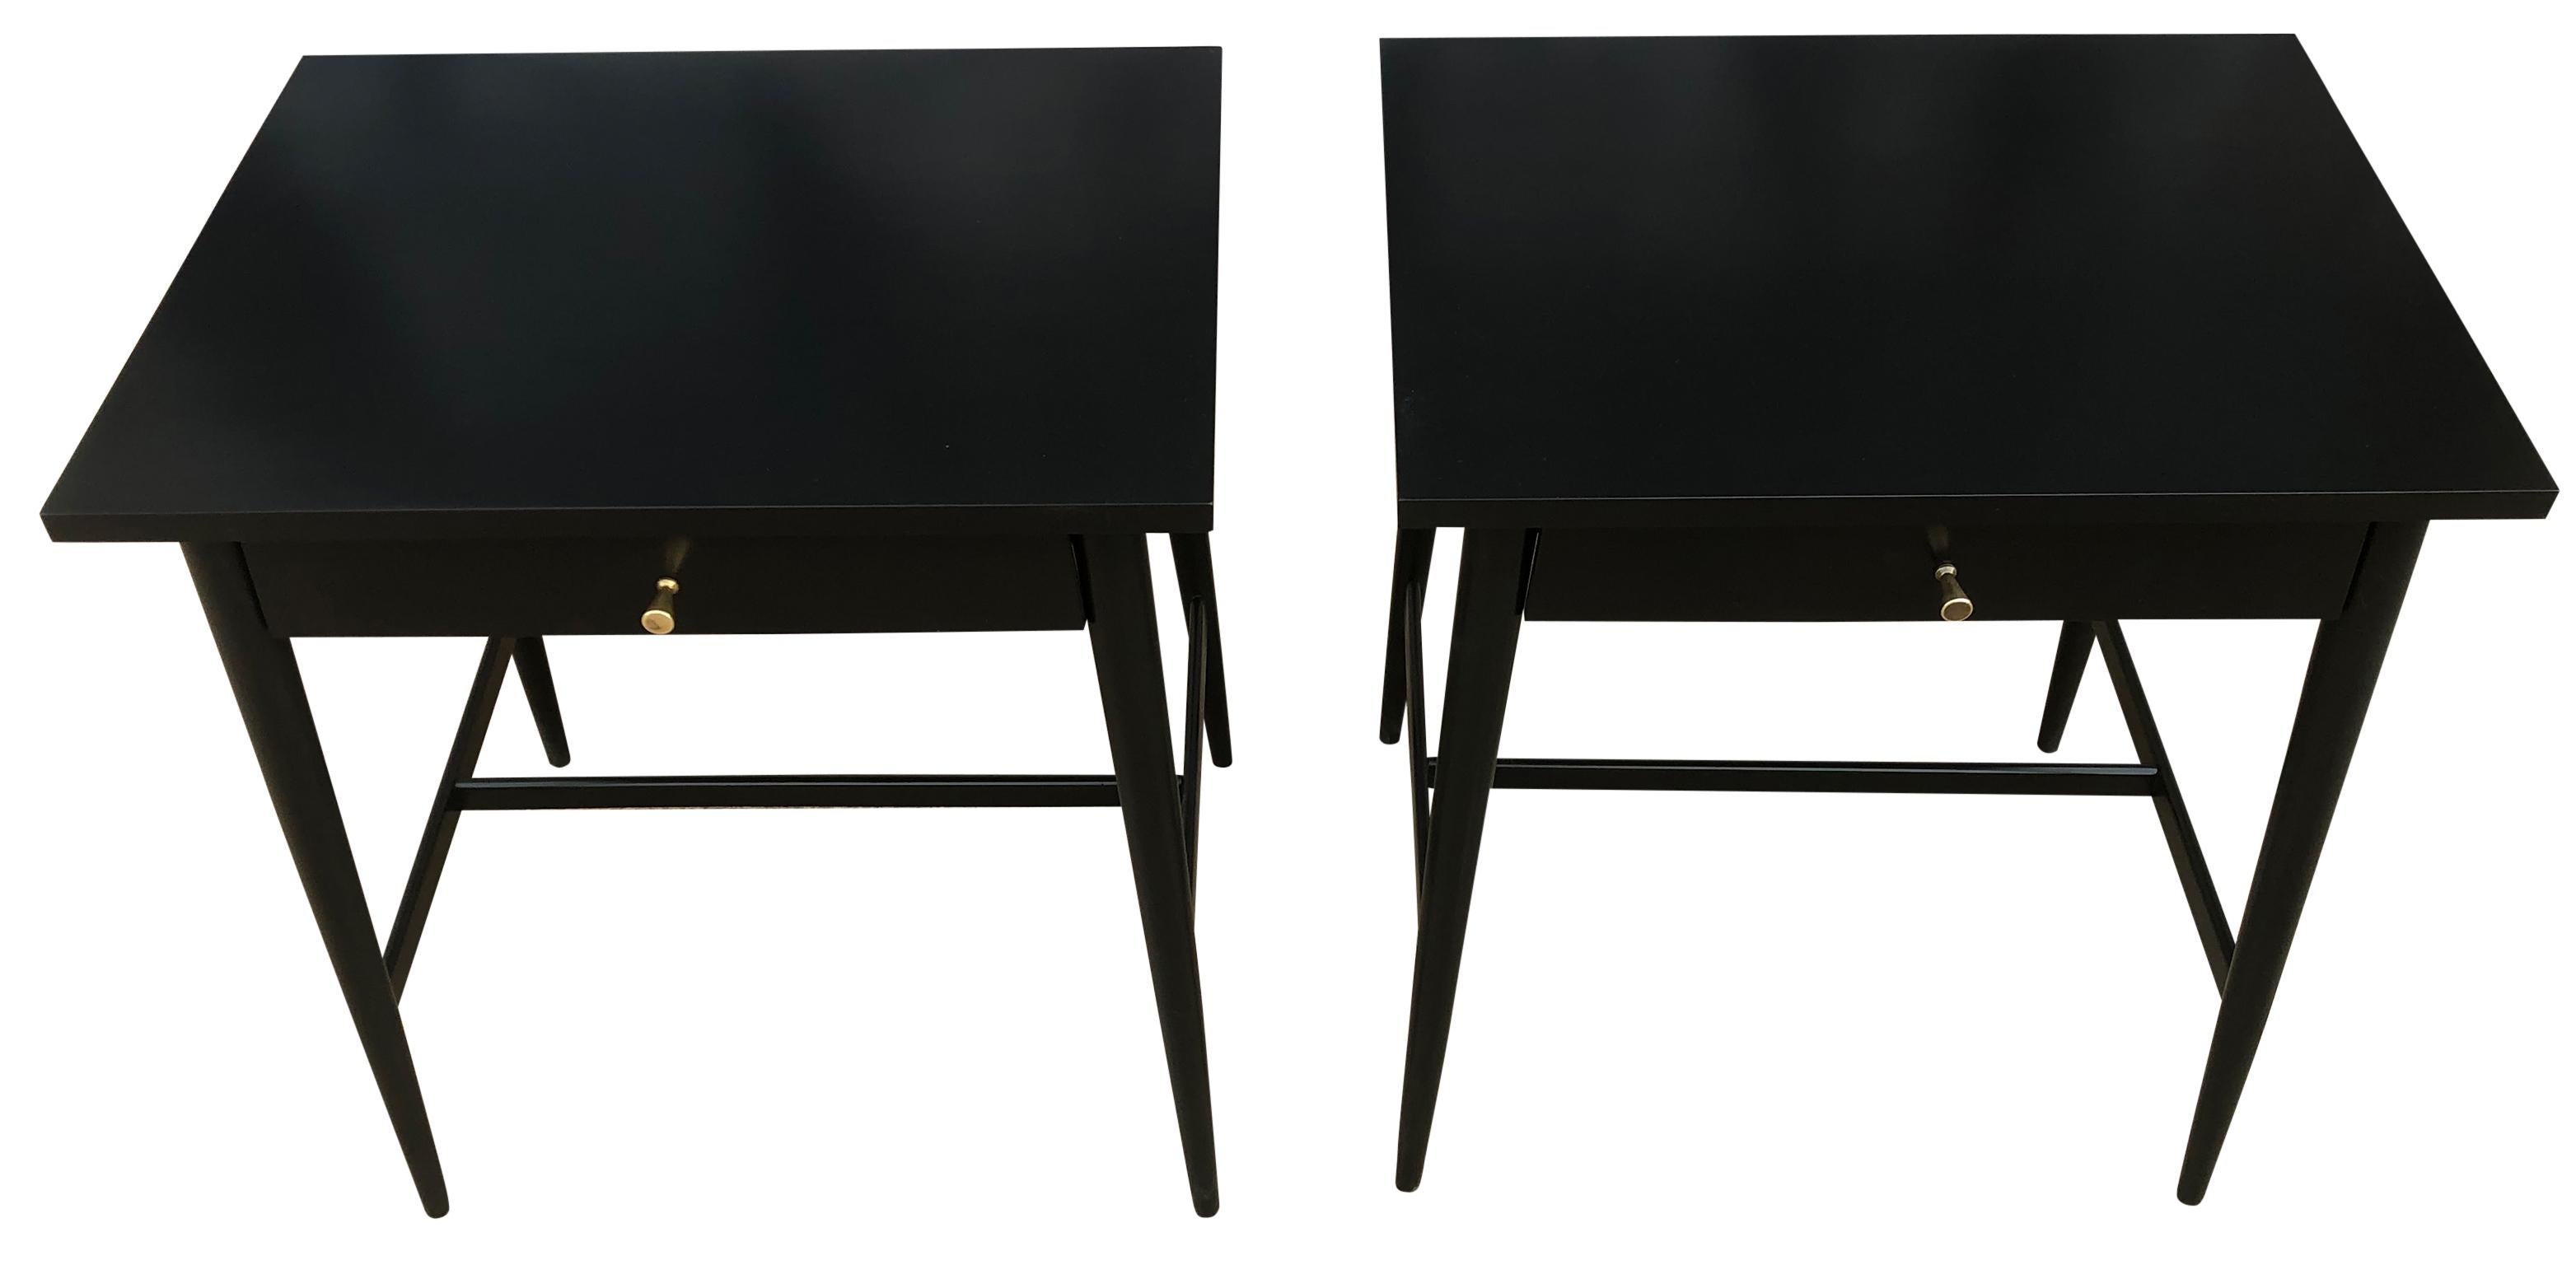 Beautiful pair of Paul McCobb Planner Group #1586 maple nightstands lamp tables single drawer Planner Group brass knobs Minimalist refinished in black lacquer - Professionally sprayed. Very delicate designed pair of nightstands with tapered legs -